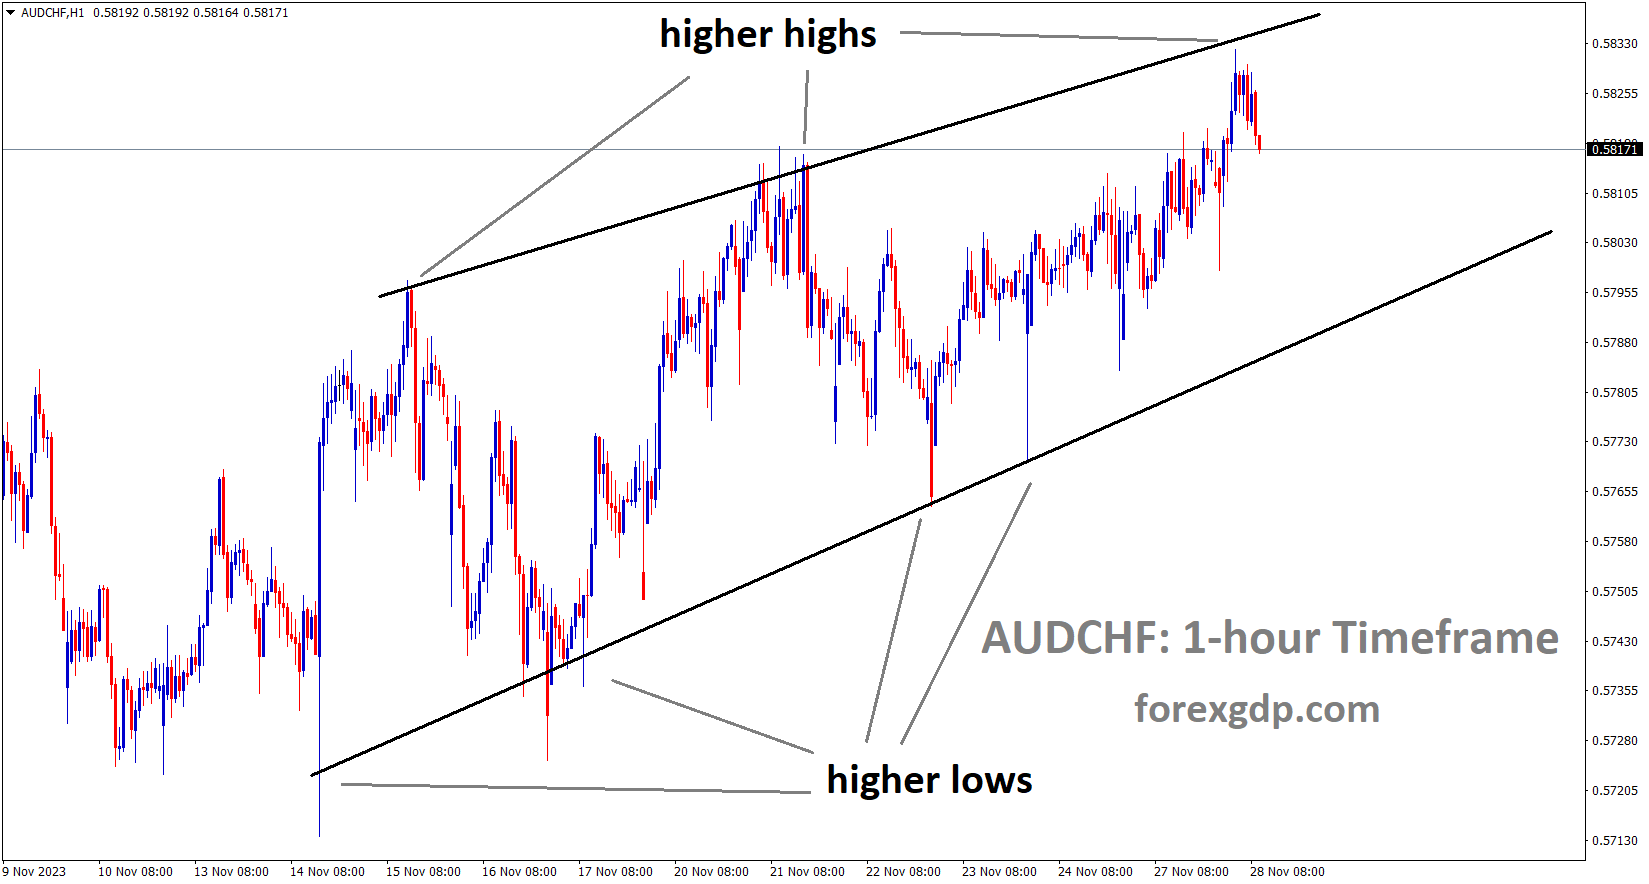 AUDCHF is moving in an Ascending channel and the market has fallen from the higher high area of the channel